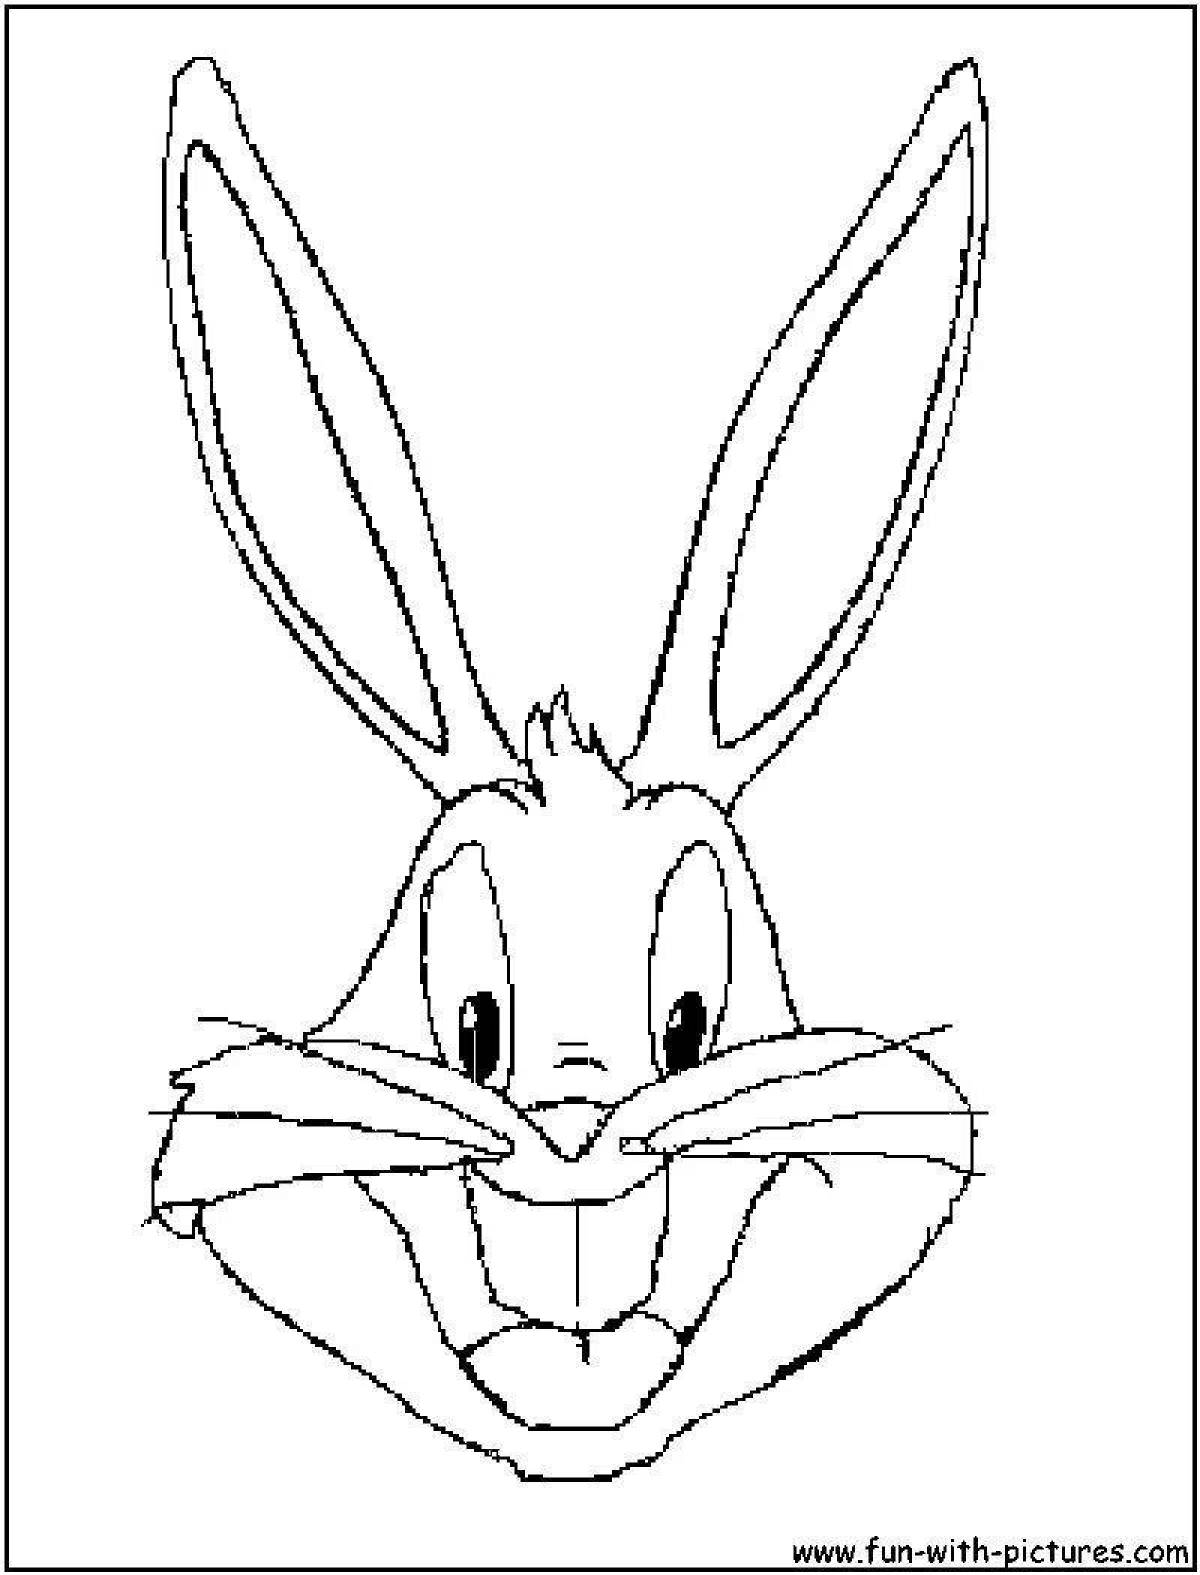 Adorable hare coloring page